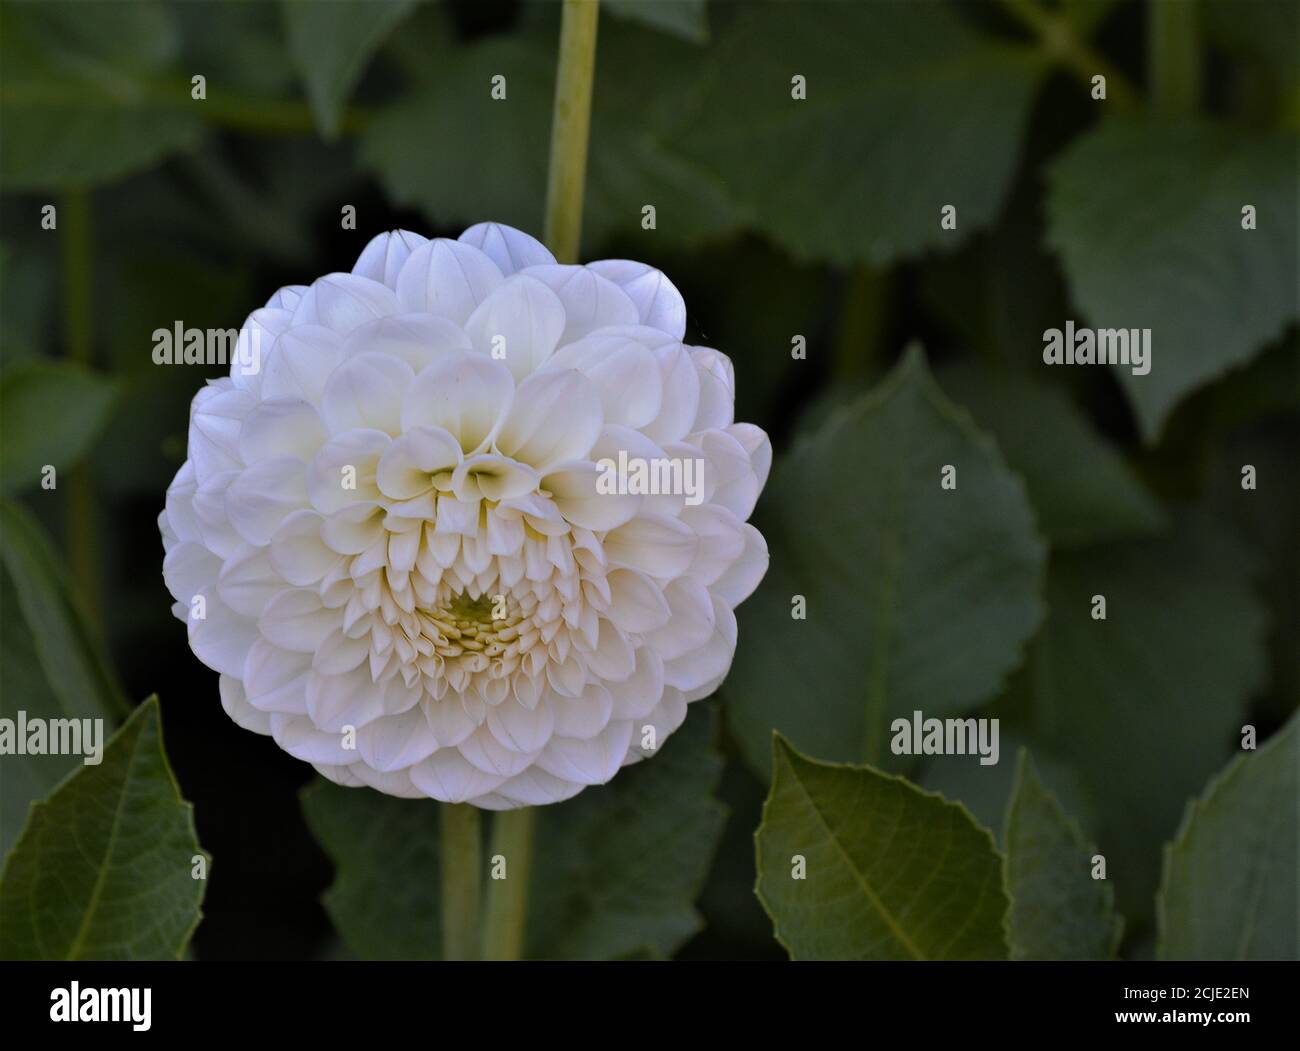 The flowers of the white pompom dahlias and the ball dahlias are spherical and compact. The petals form a tube because they are rolled up along the lo Stock Photo